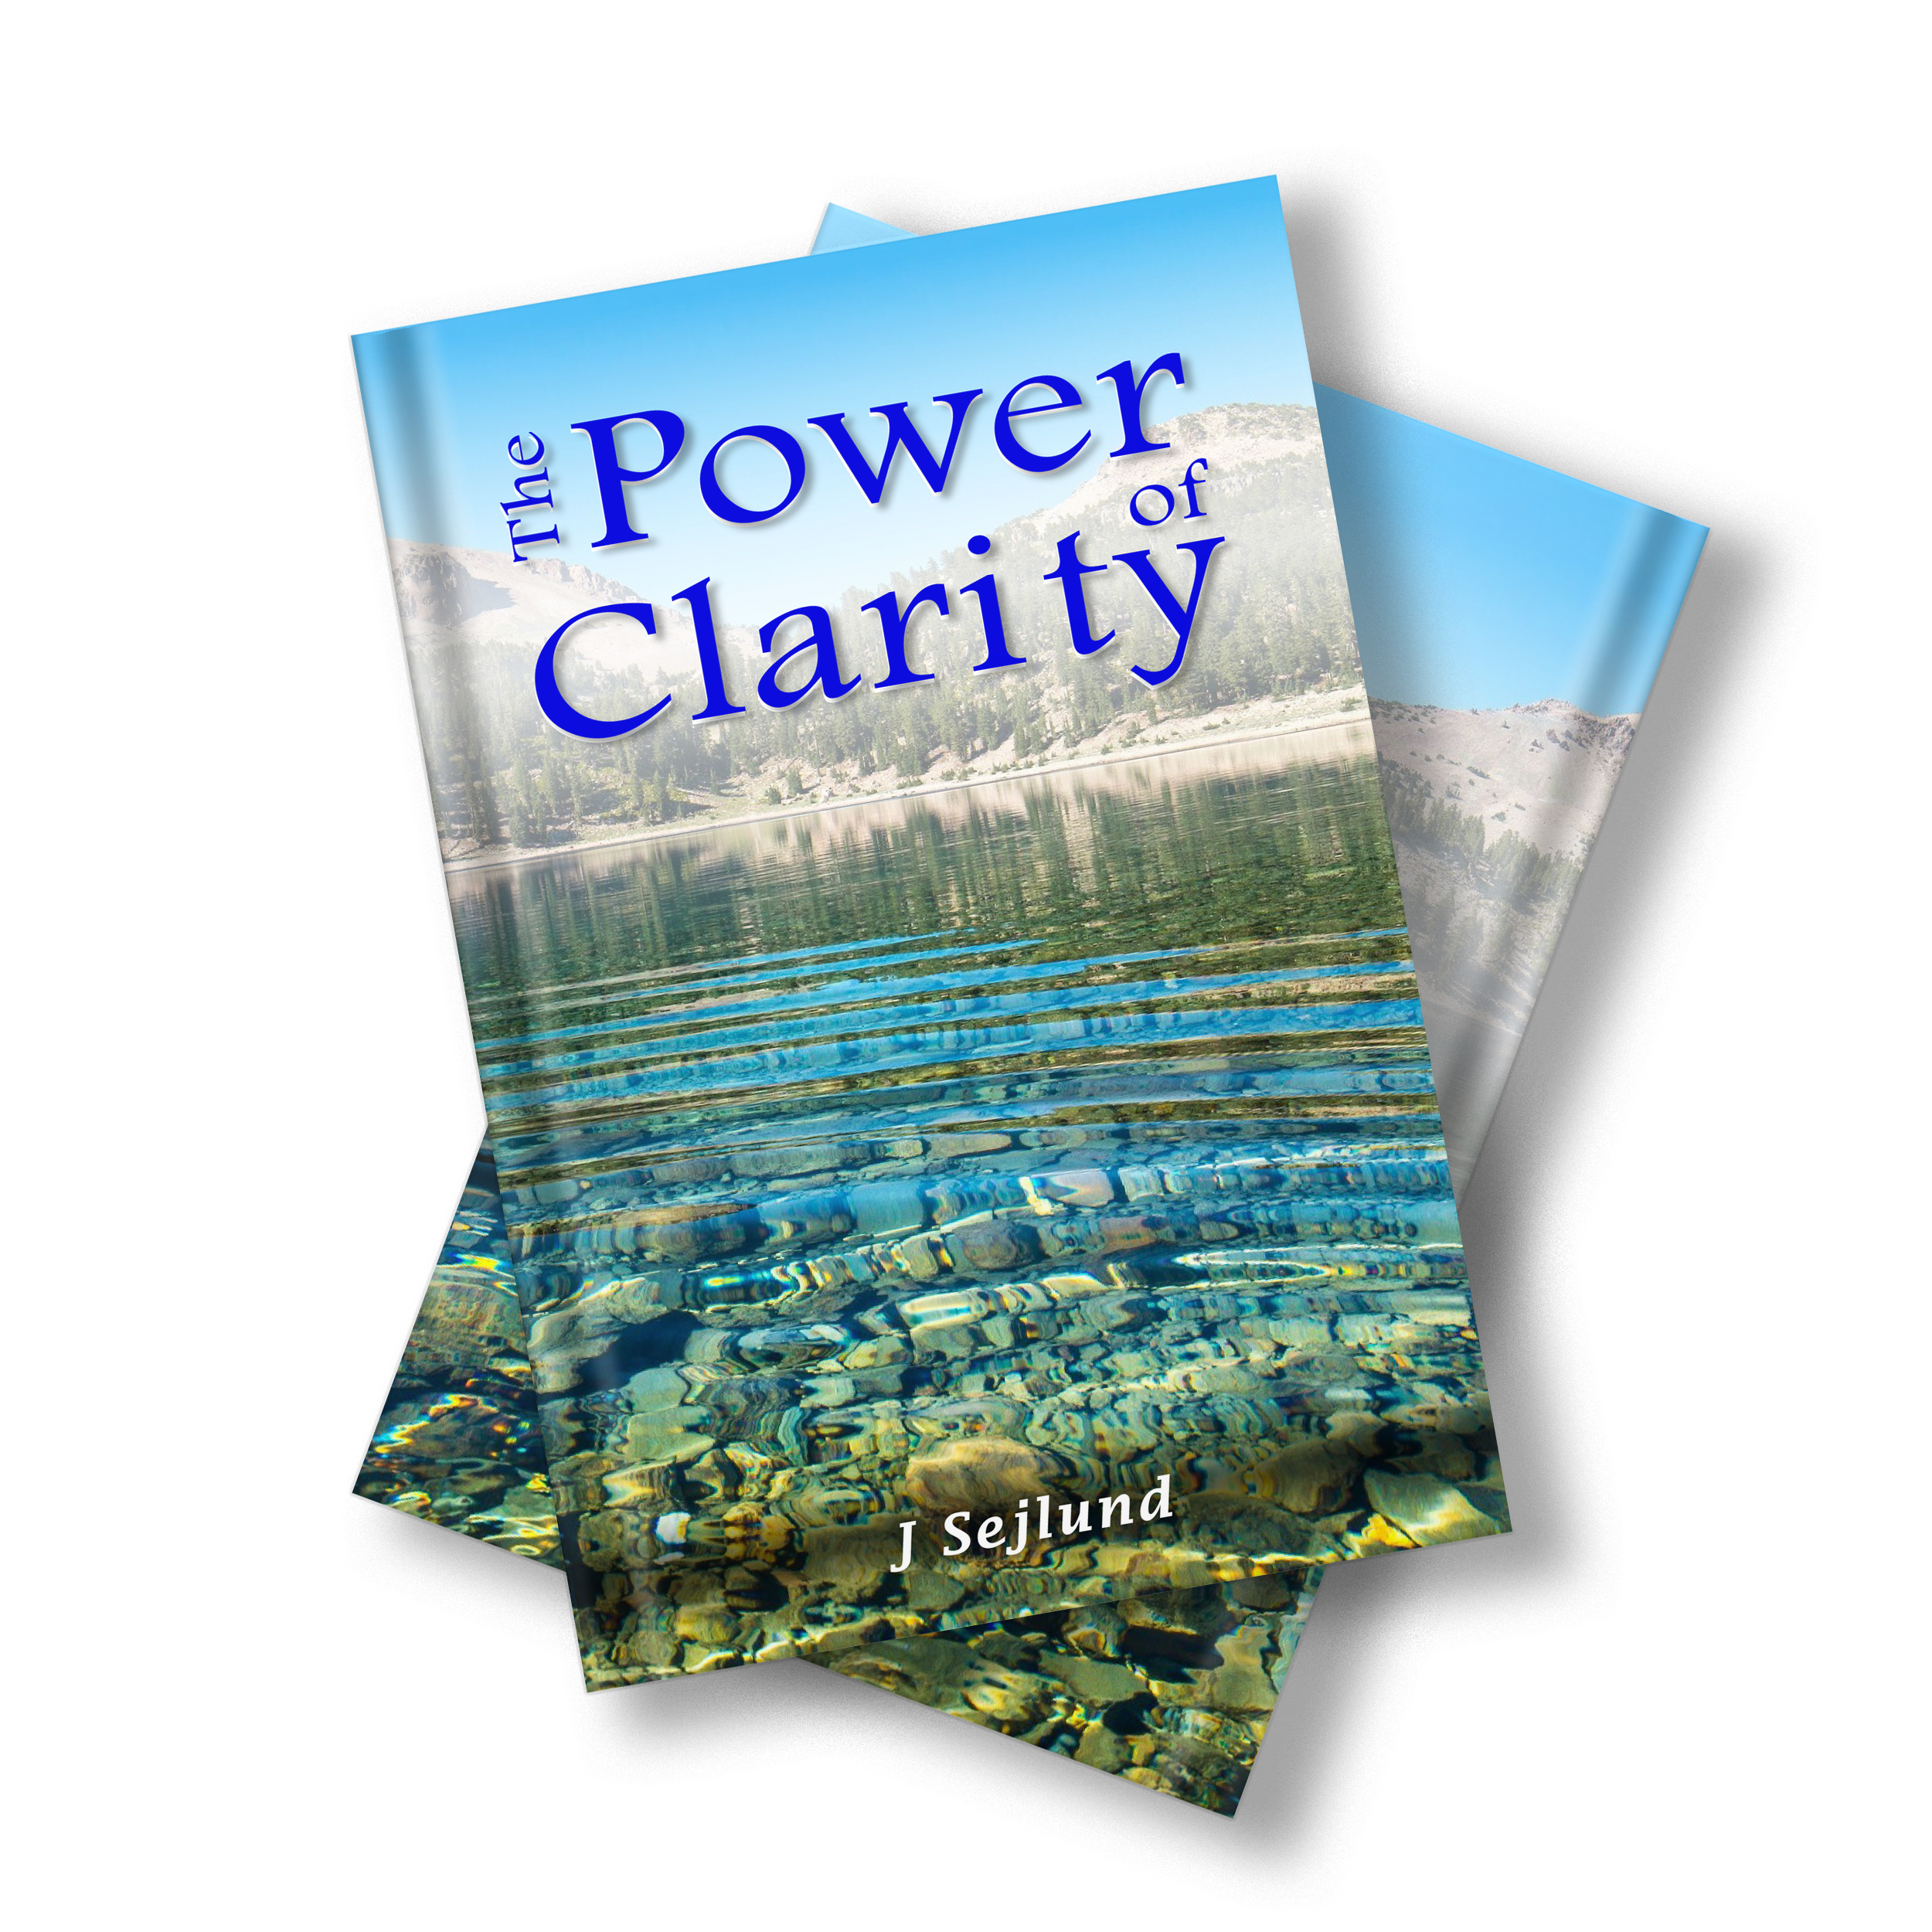 Far from Banality, This New Self-Help Book ‘The Power of Clarity’ is a Nifty Read for All Ages.